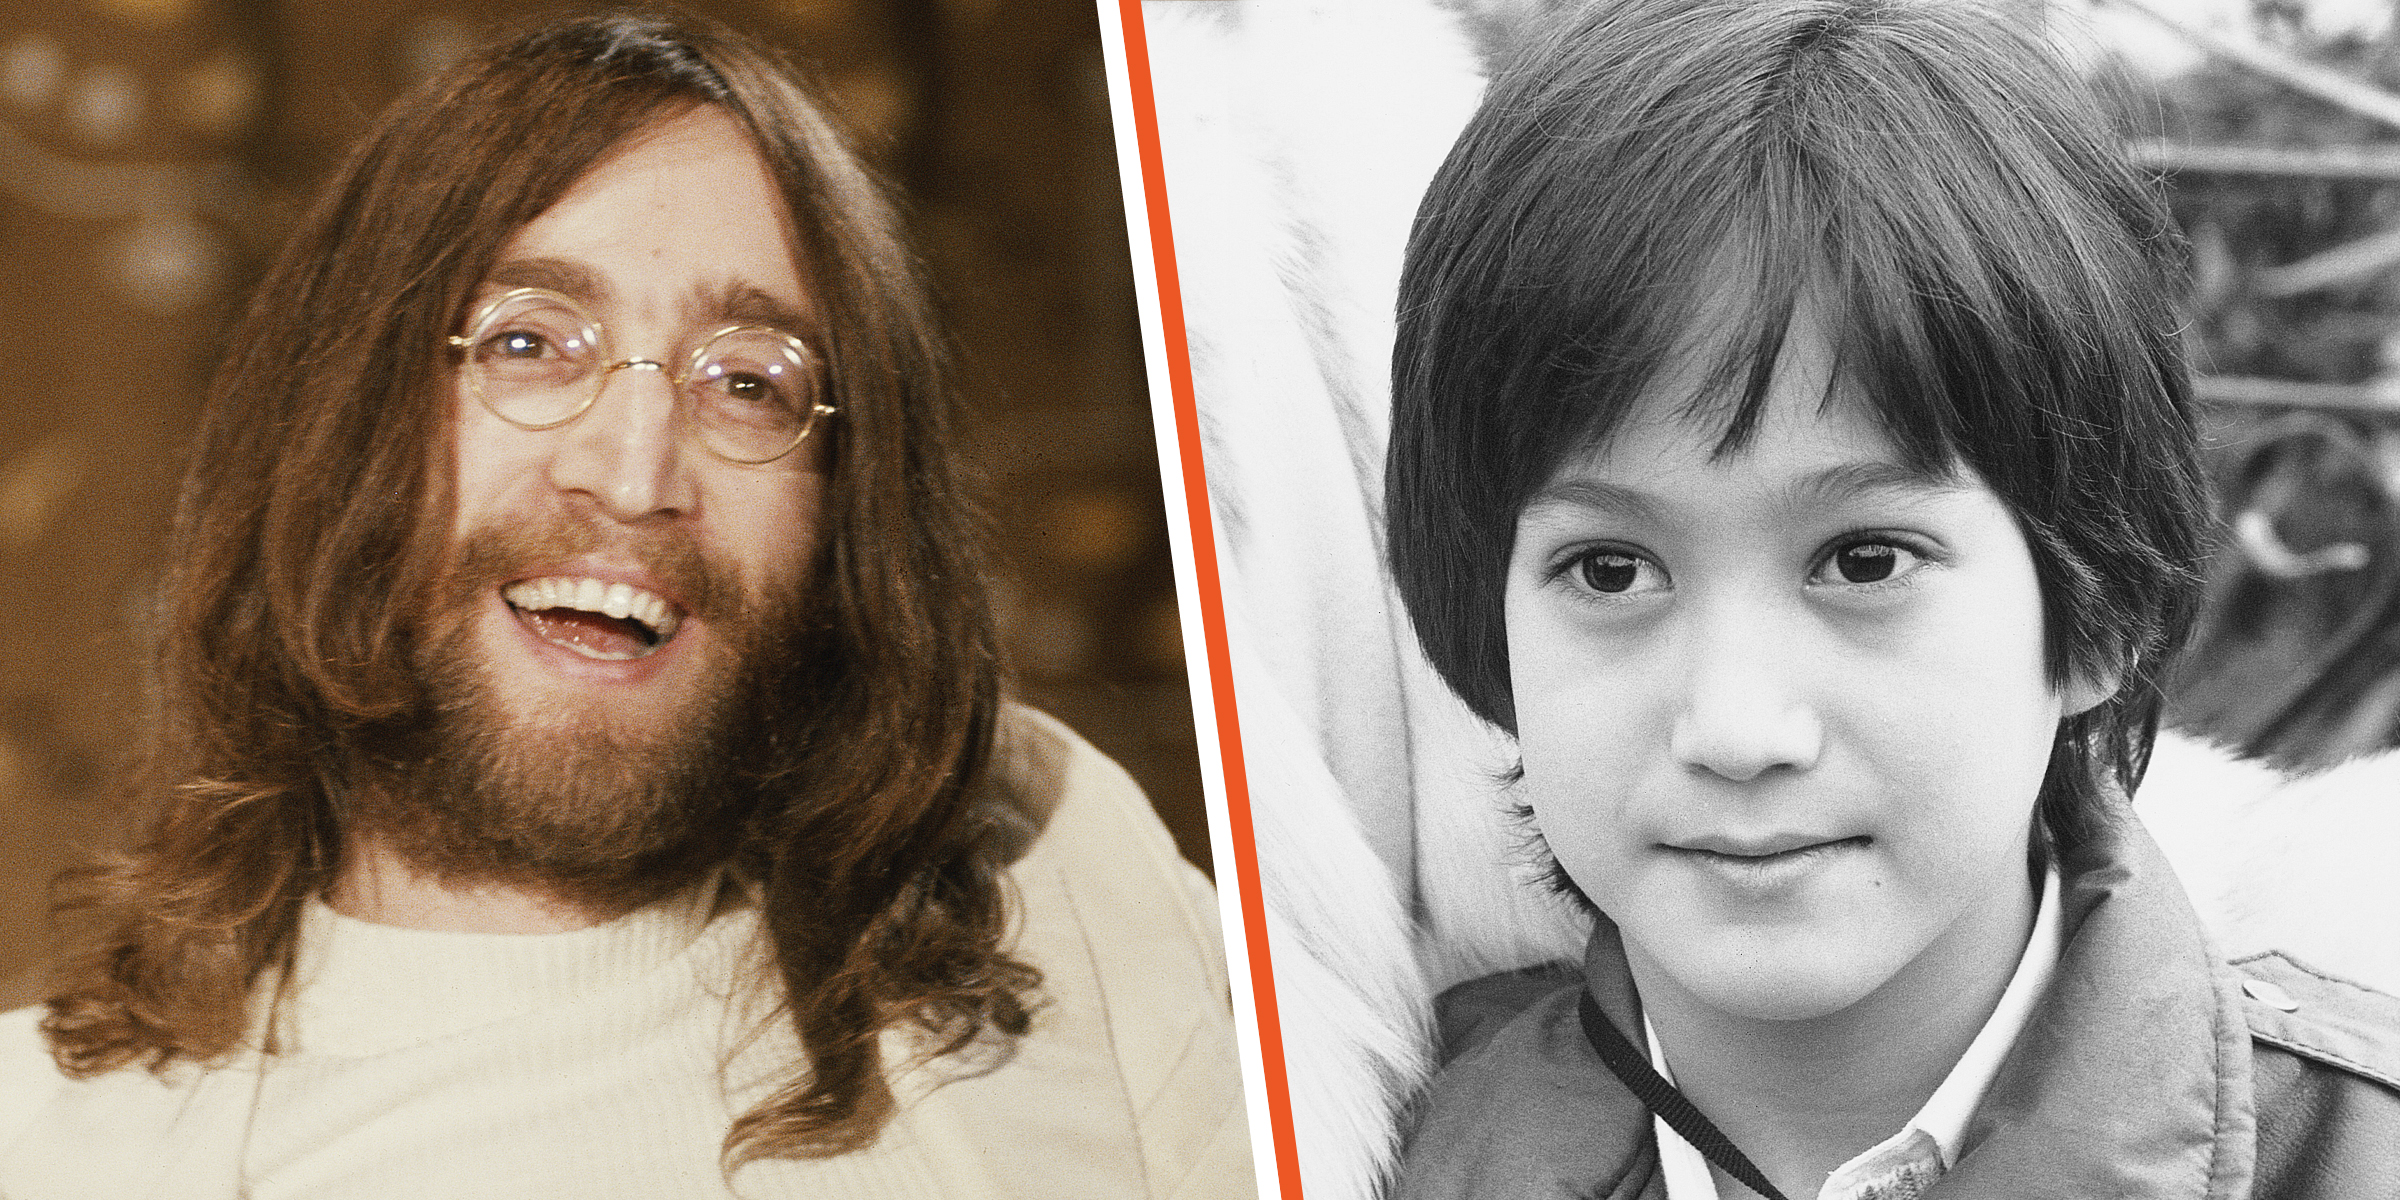 John Lennon and his son Sean | Source: Getty Images